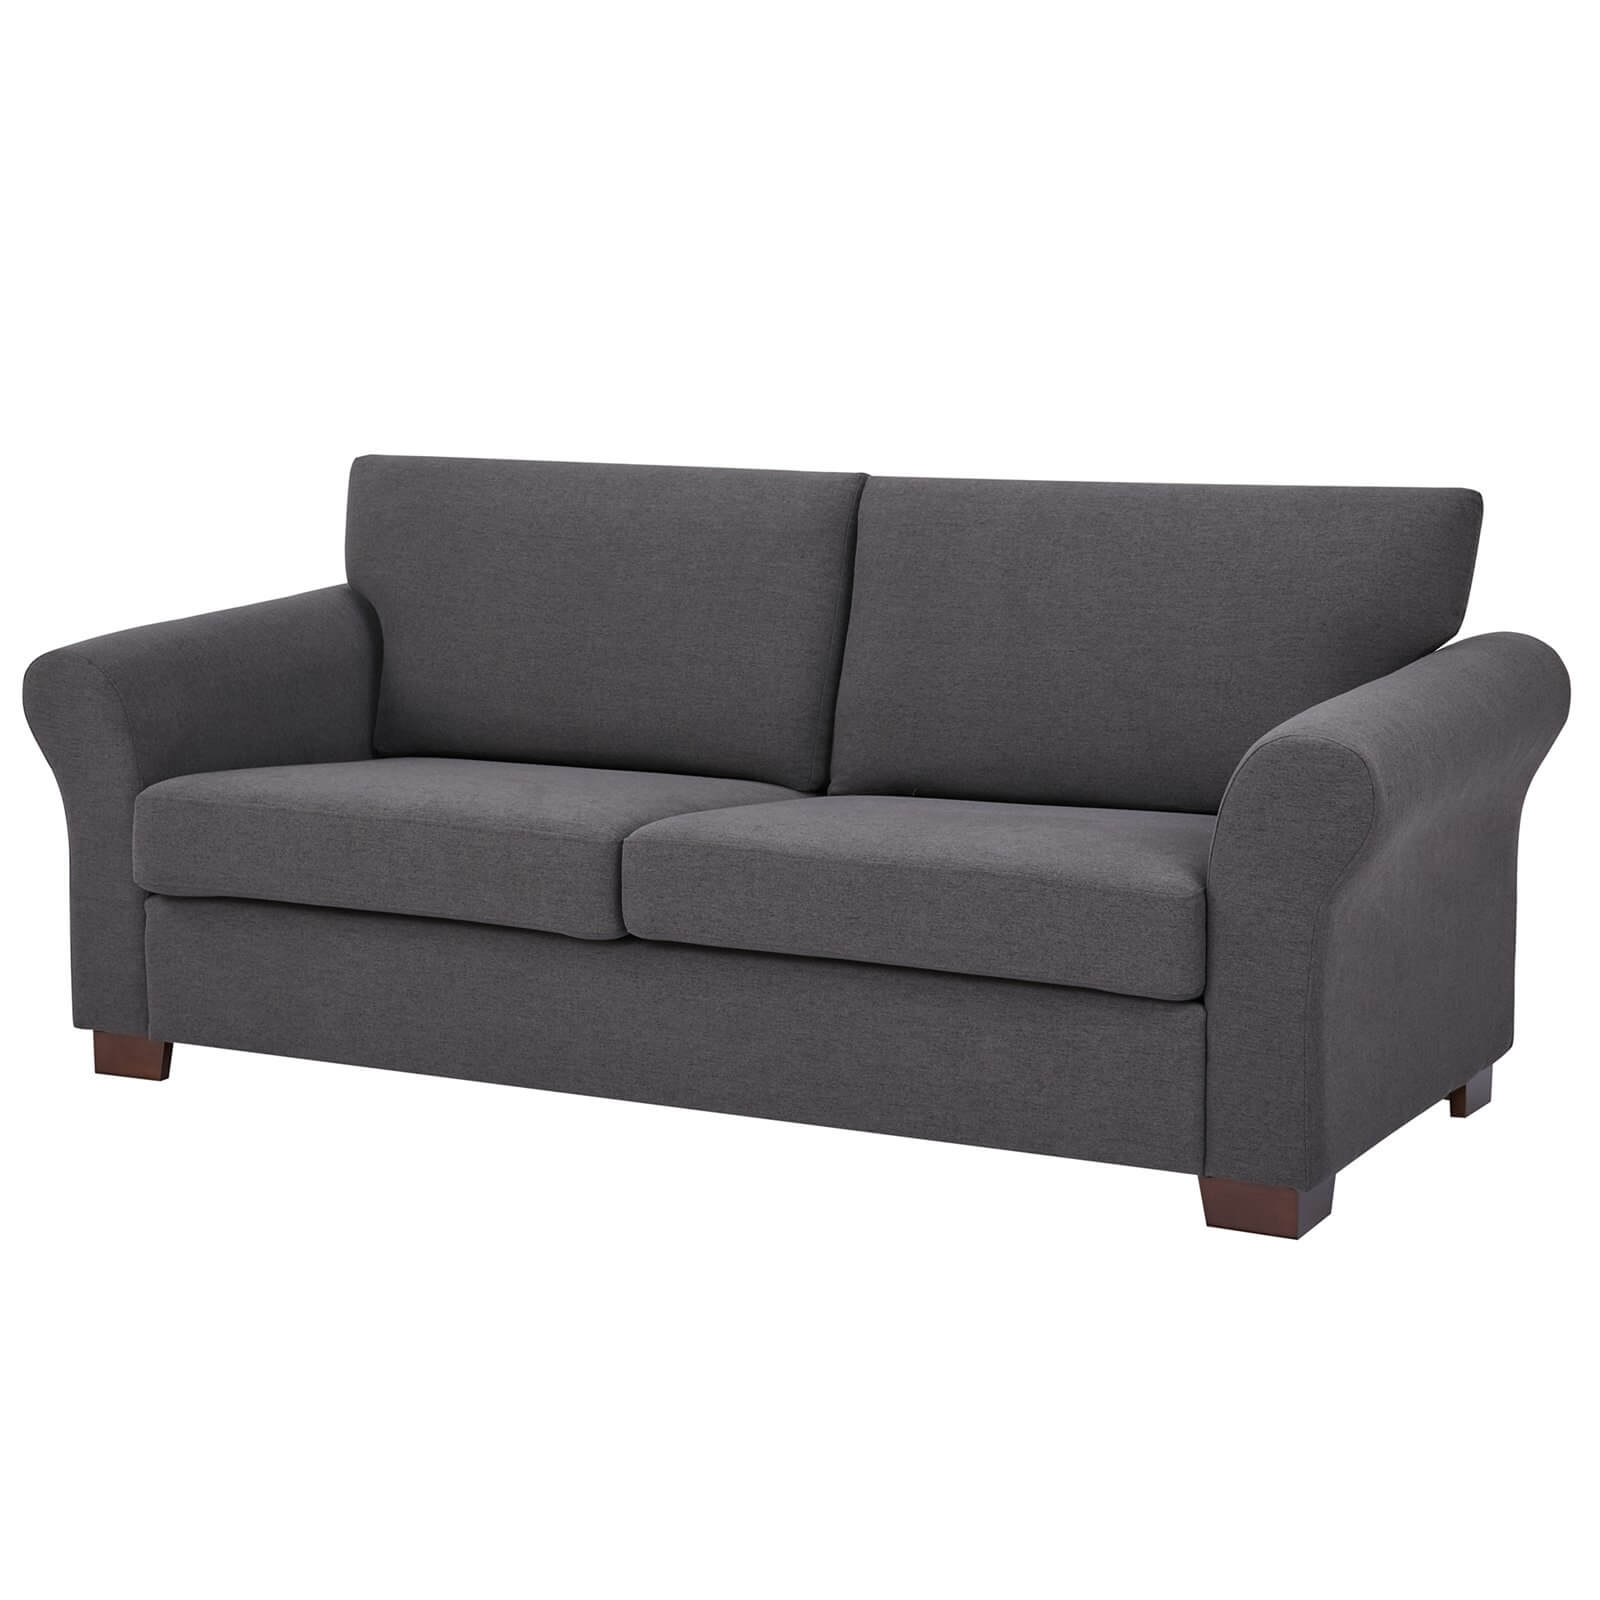 Hayley 3 Seater Sofa - Charcoal